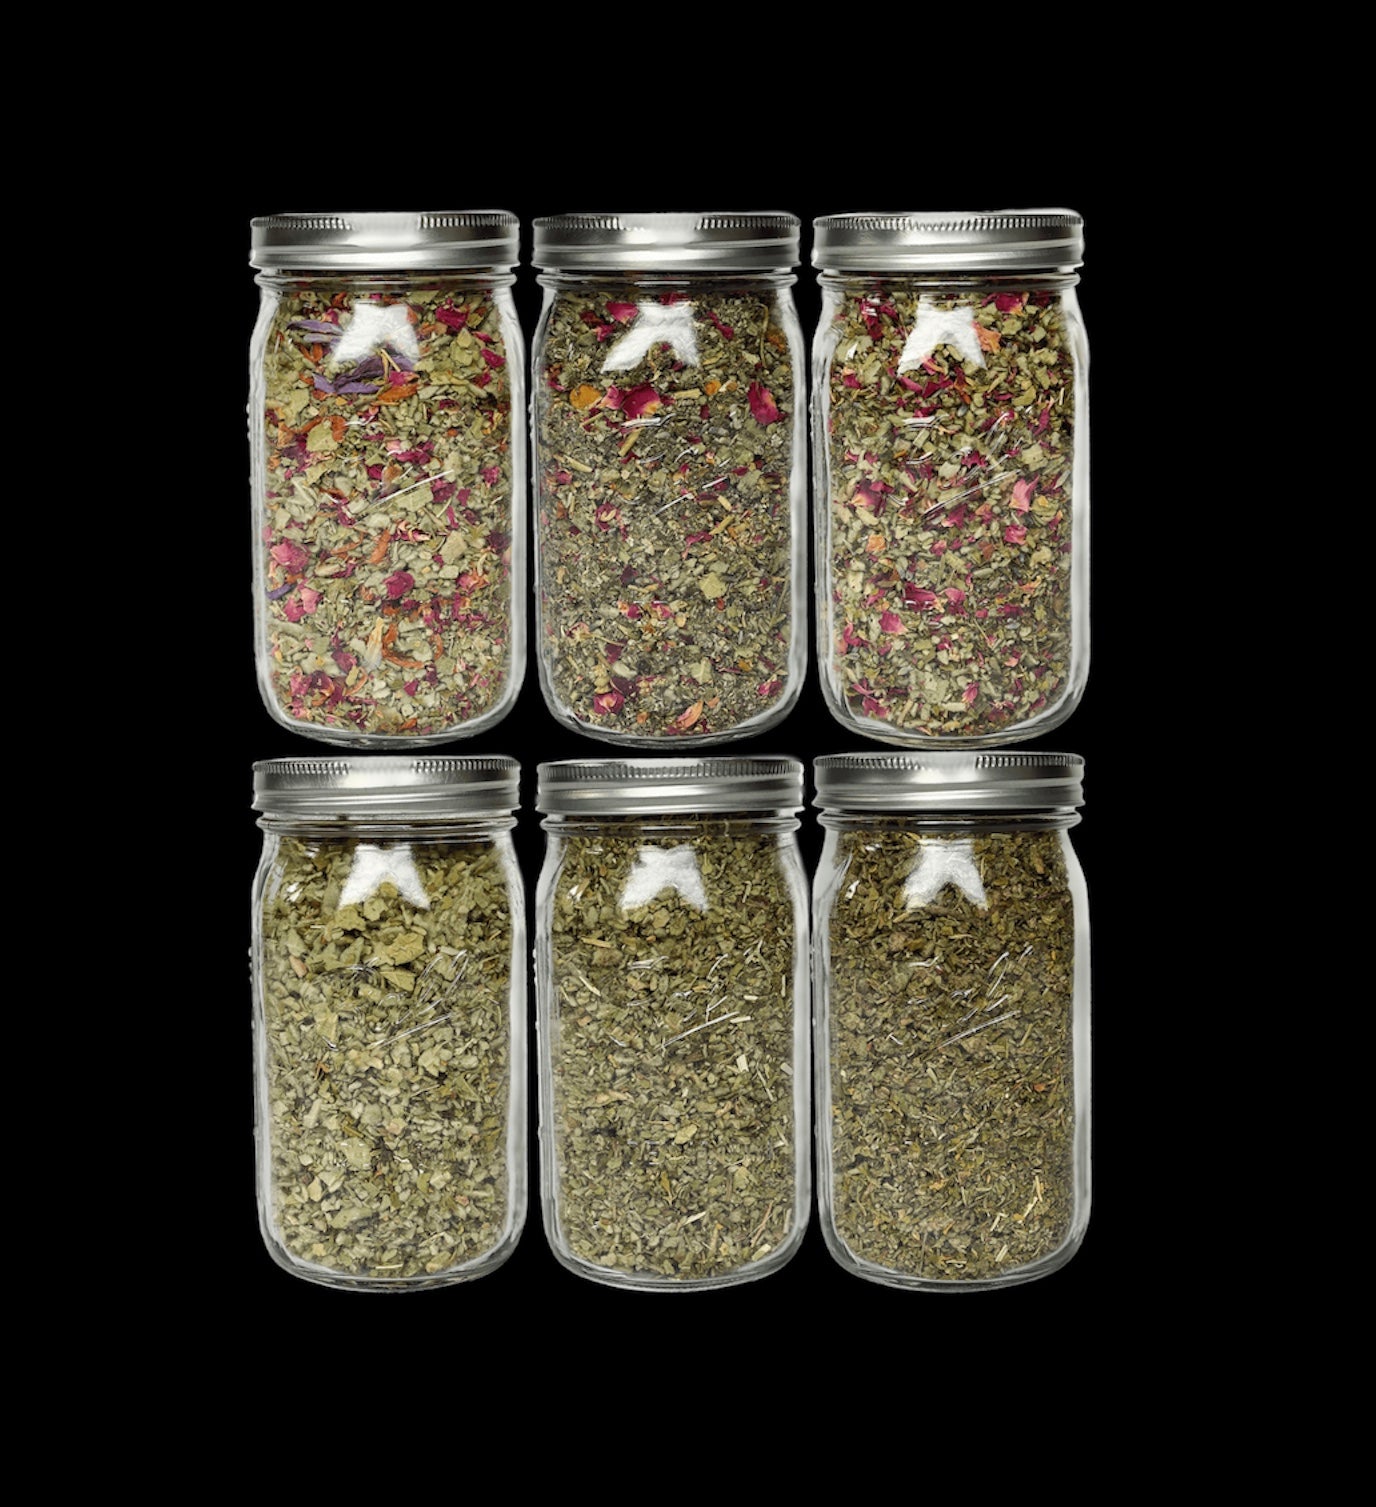 Smoking Herbs and Blends